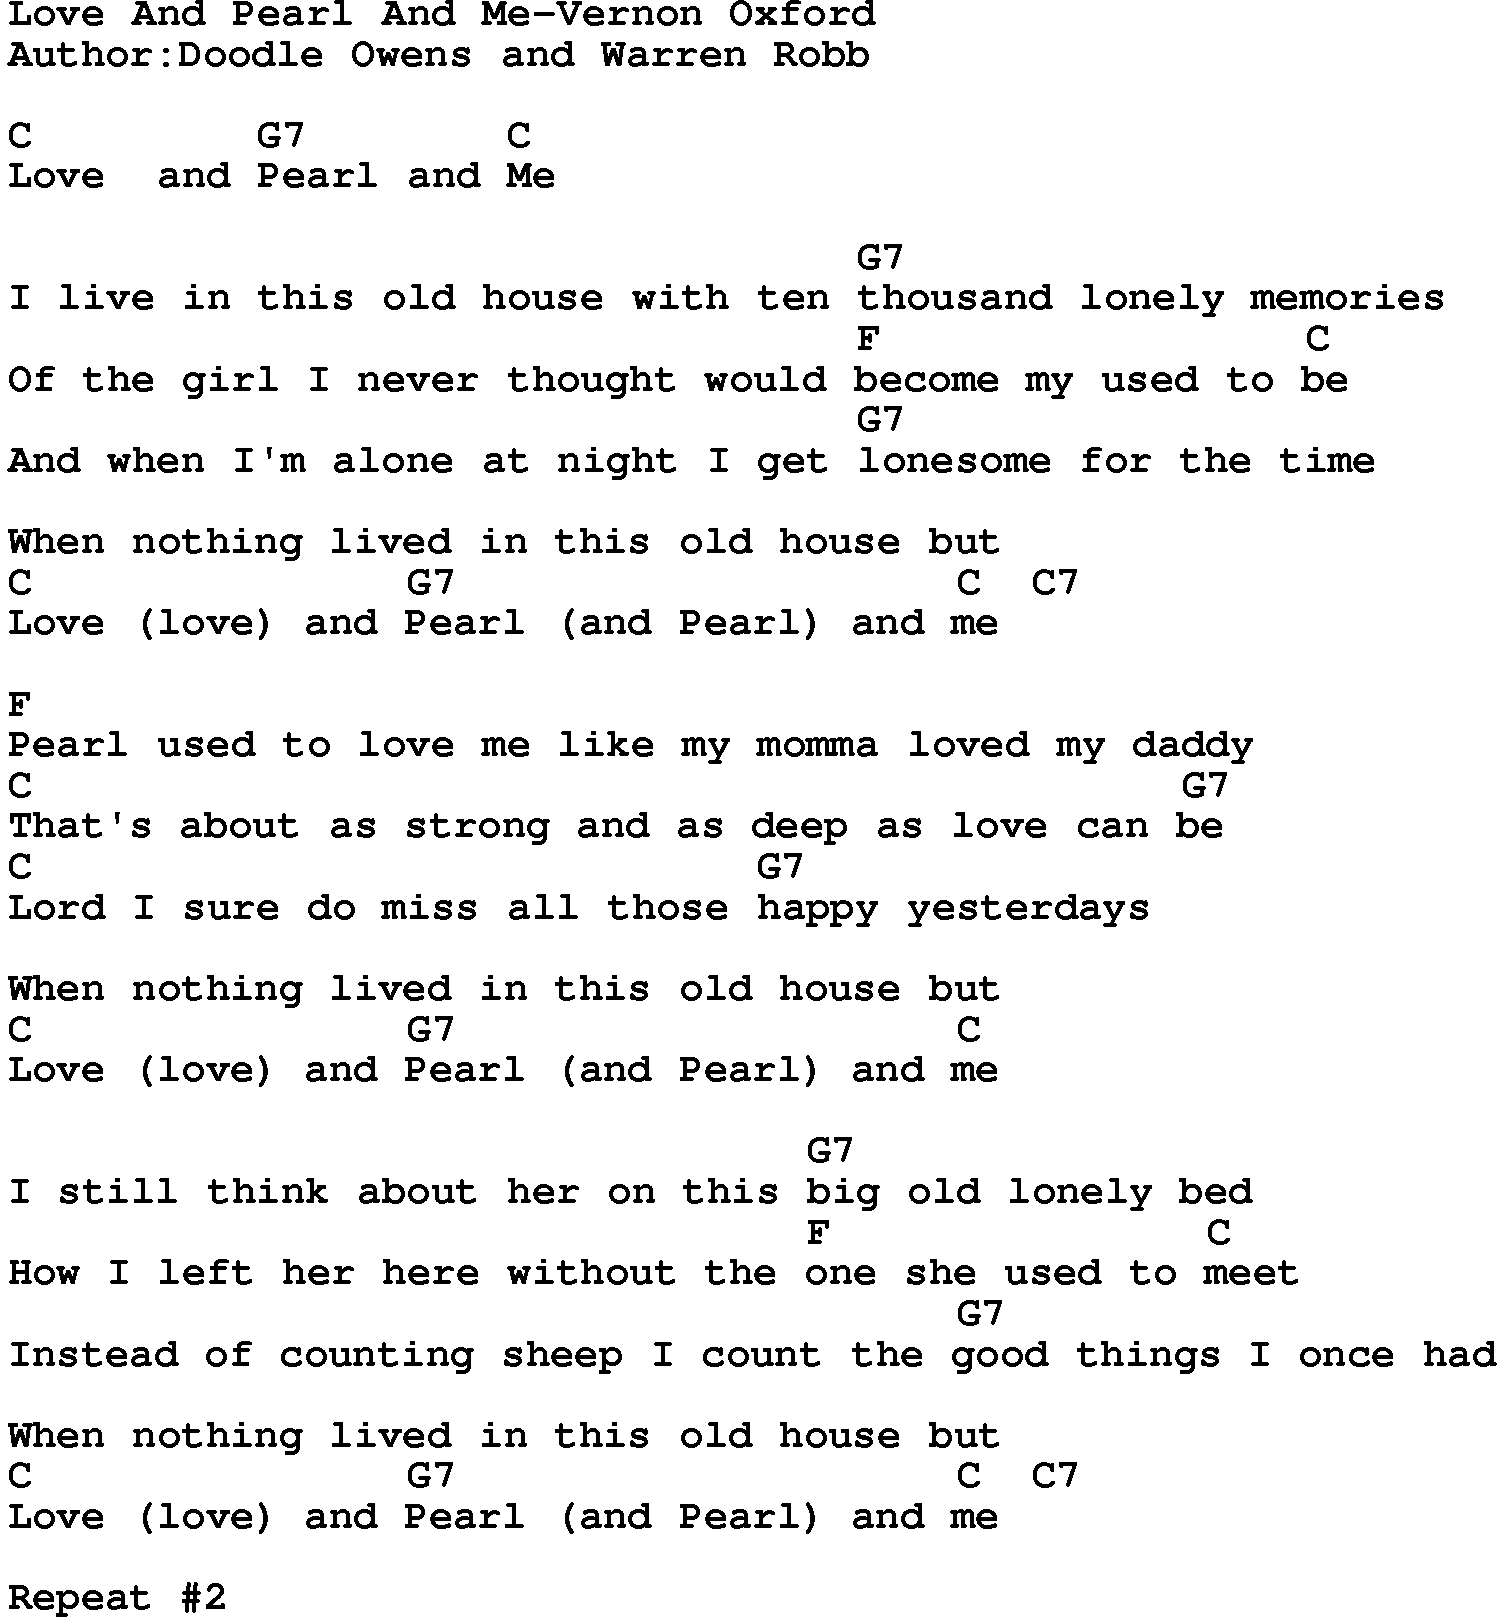 Country music song: Love And Pearl And Me-Vernon Oxford lyrics and chords